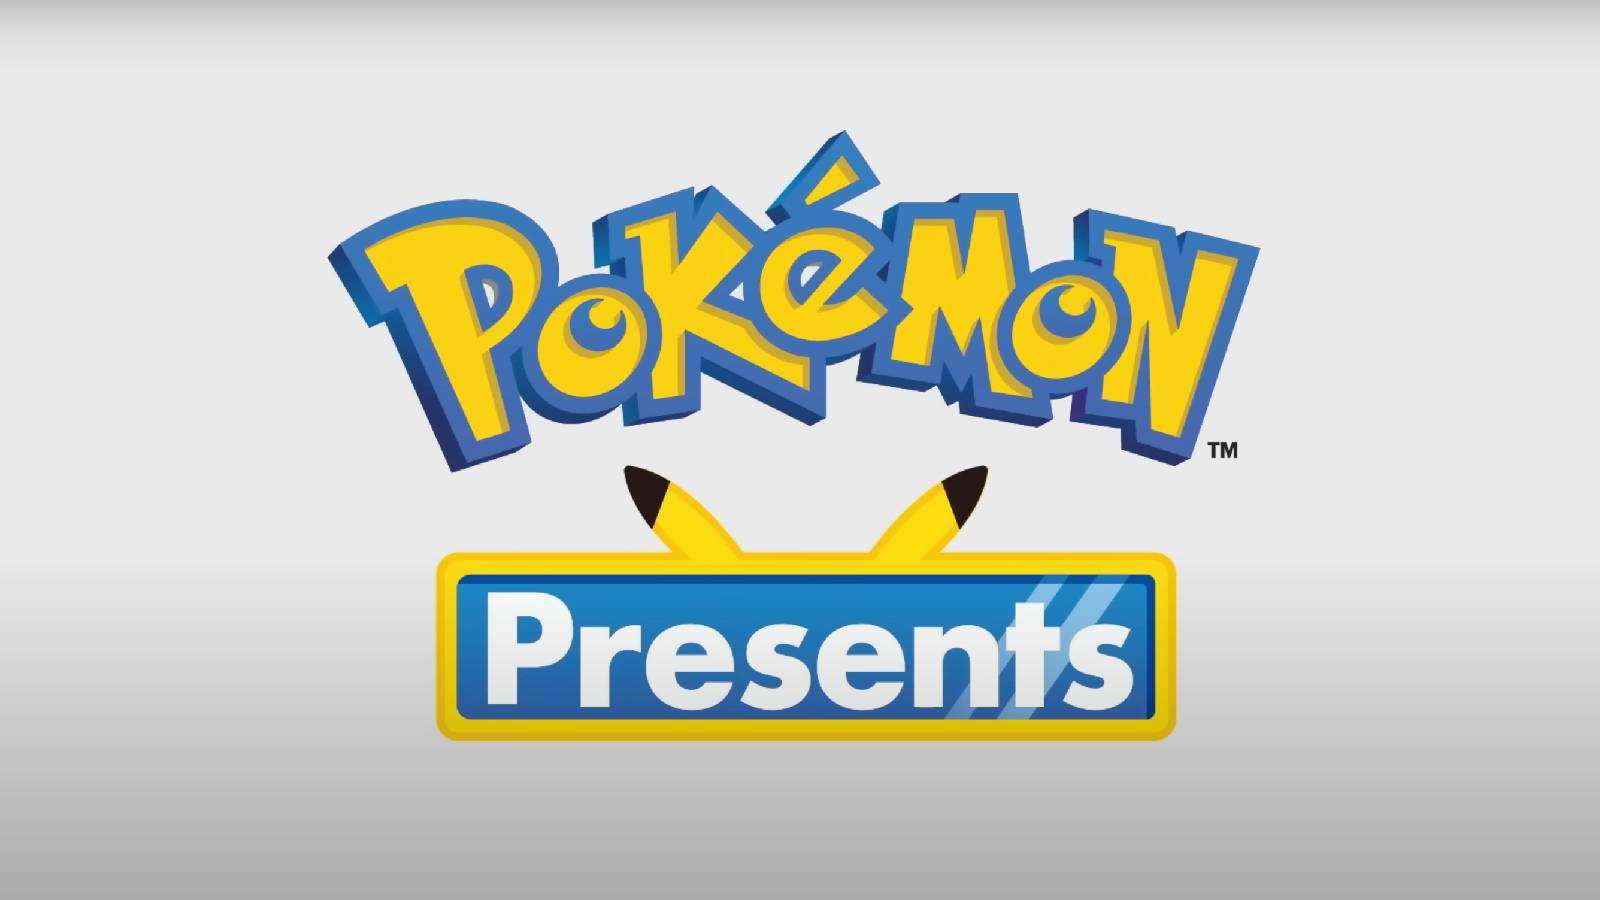 Test reards "Pokemon Presents" against a white background